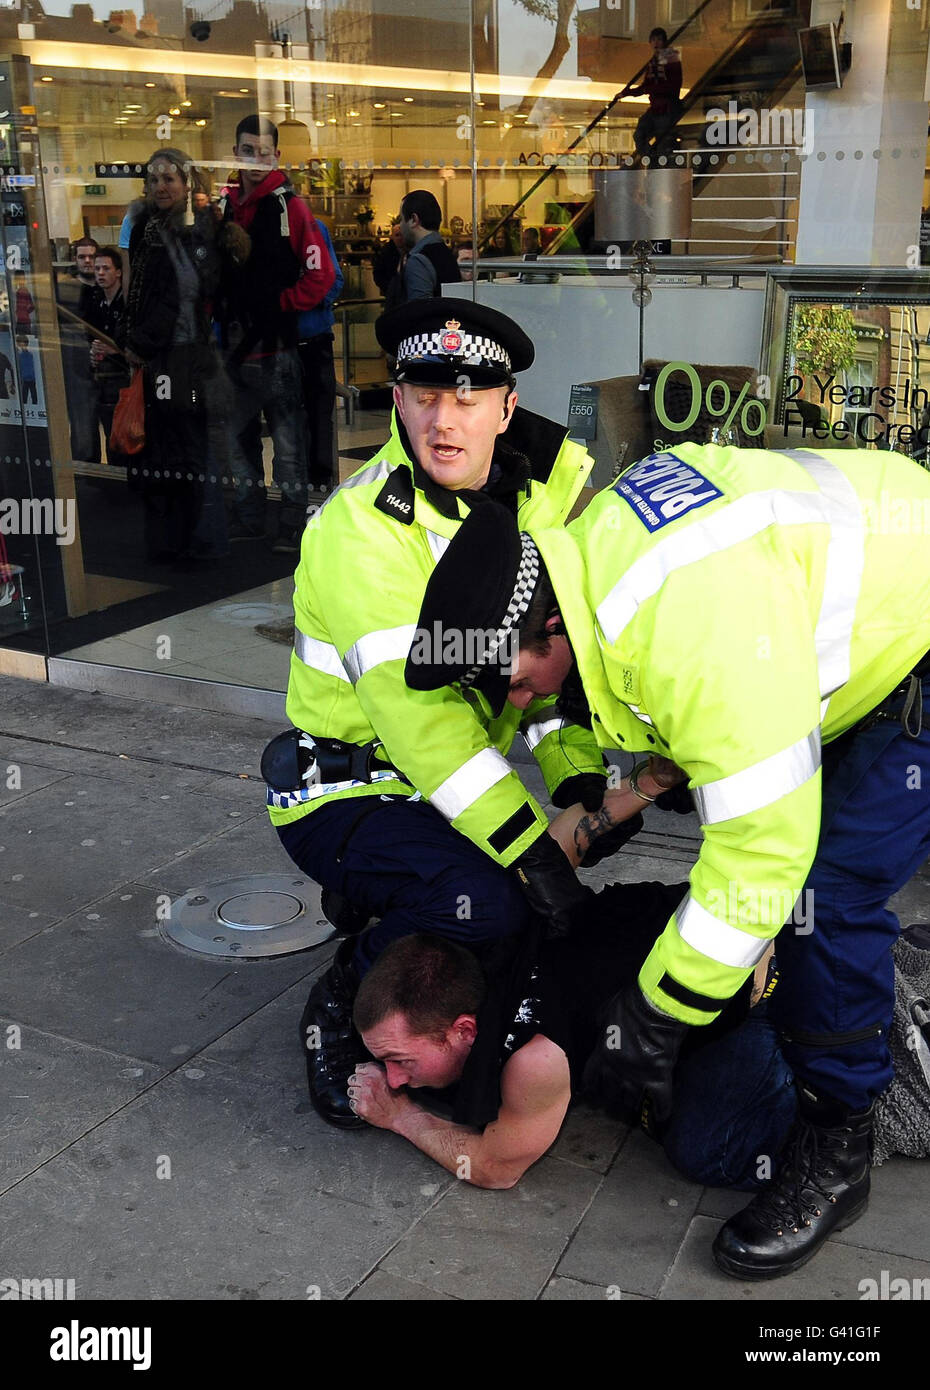 The Manchester demonstration turns violent as protestors try and break into city centre shops. Stock Photo